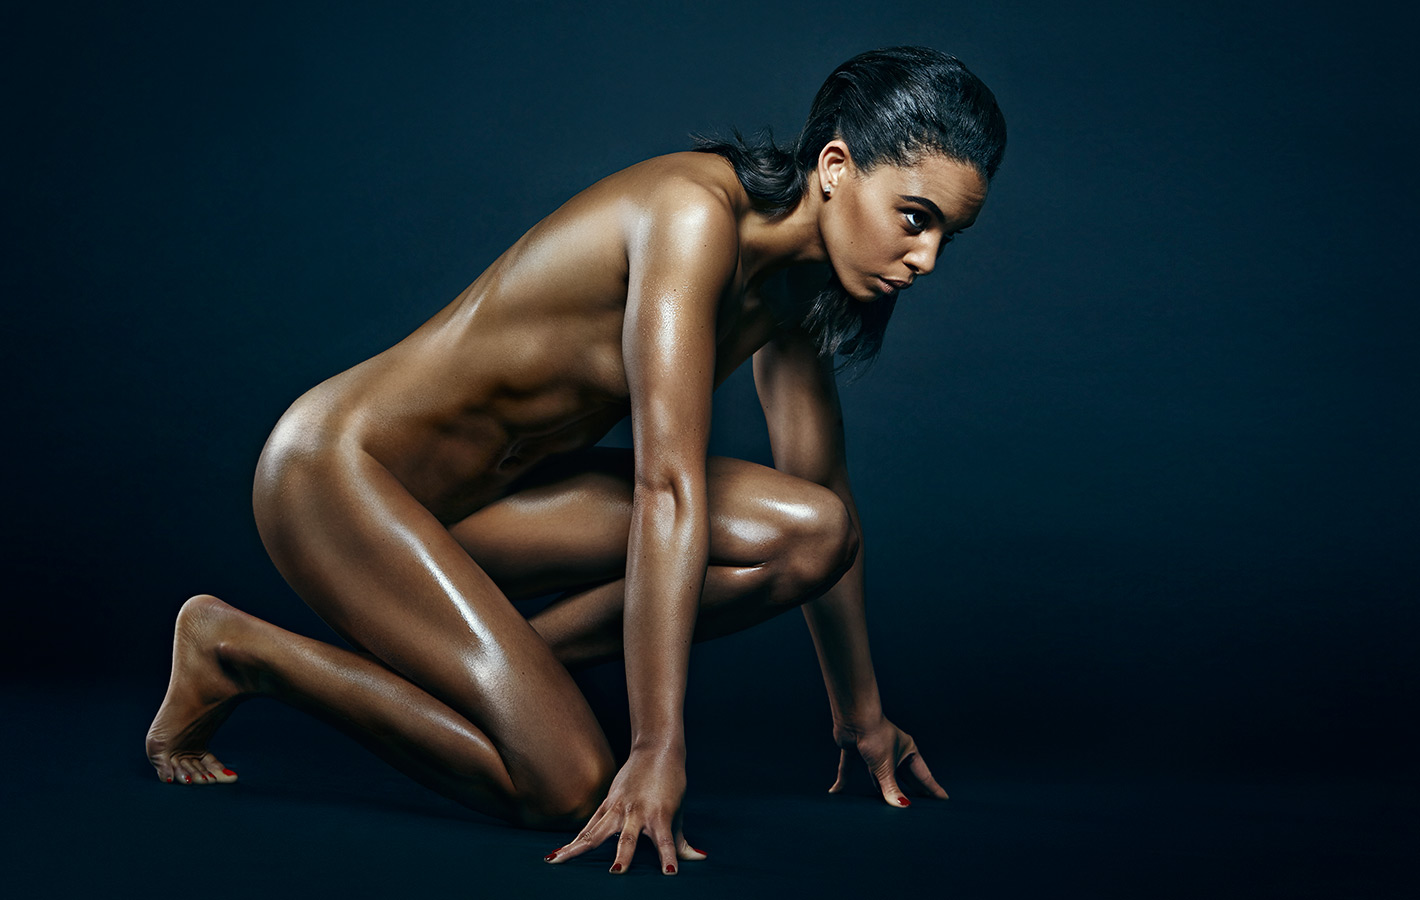 The hottest nude pics of black women